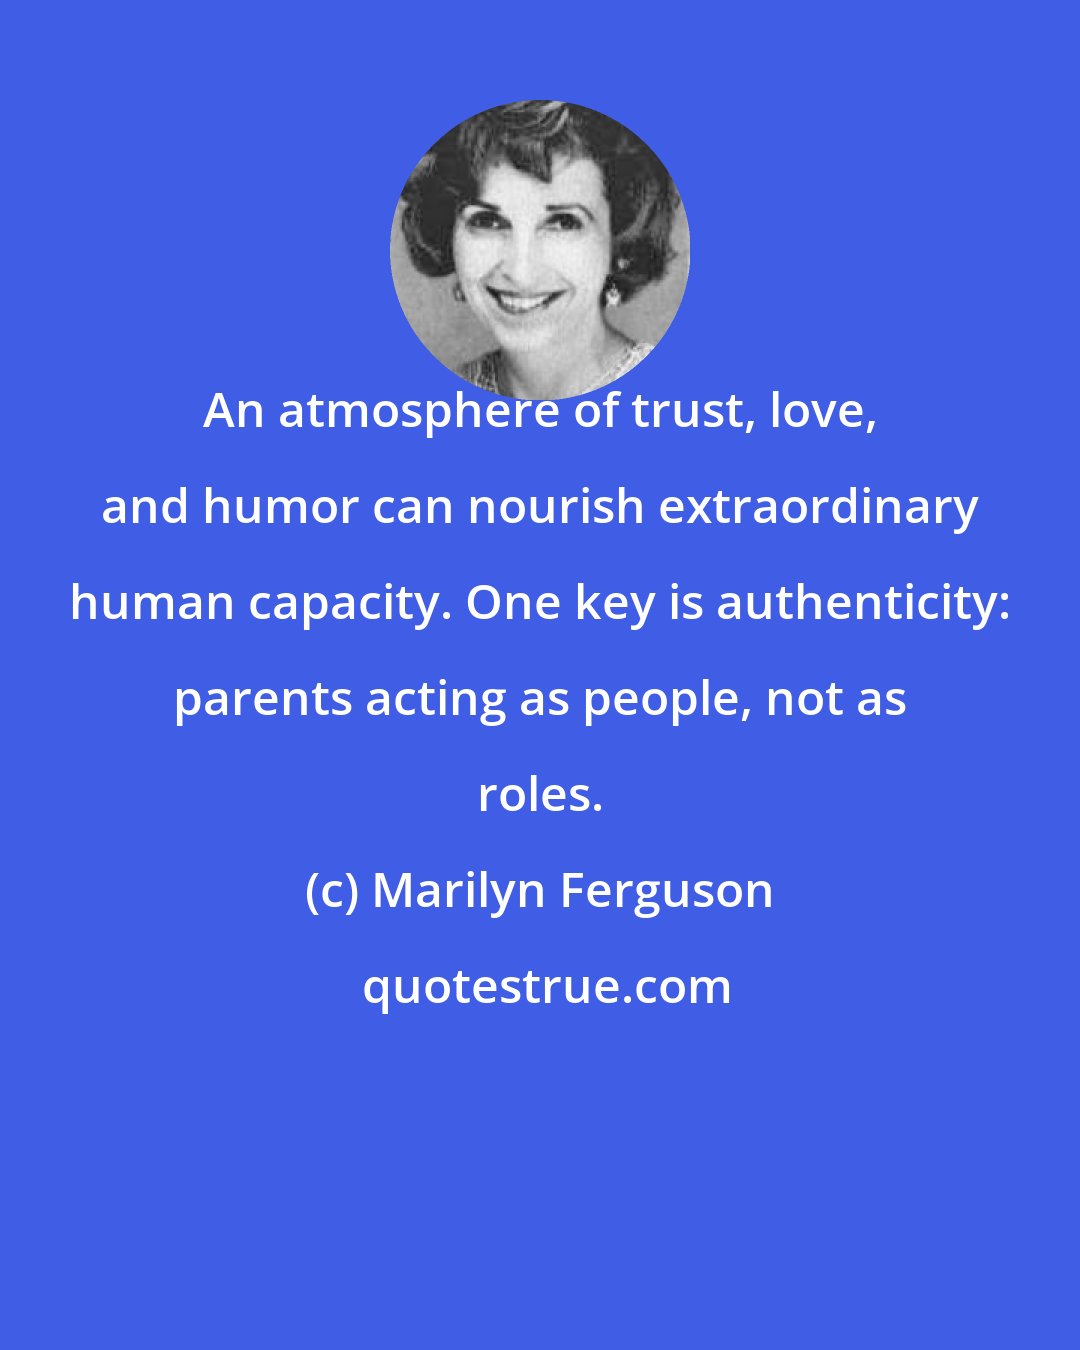 Marilyn Ferguson: An atmosphere of trust, love, and humor can nourish extraordinary human capacity. One key is authenticity: parents acting as people, not as roles.